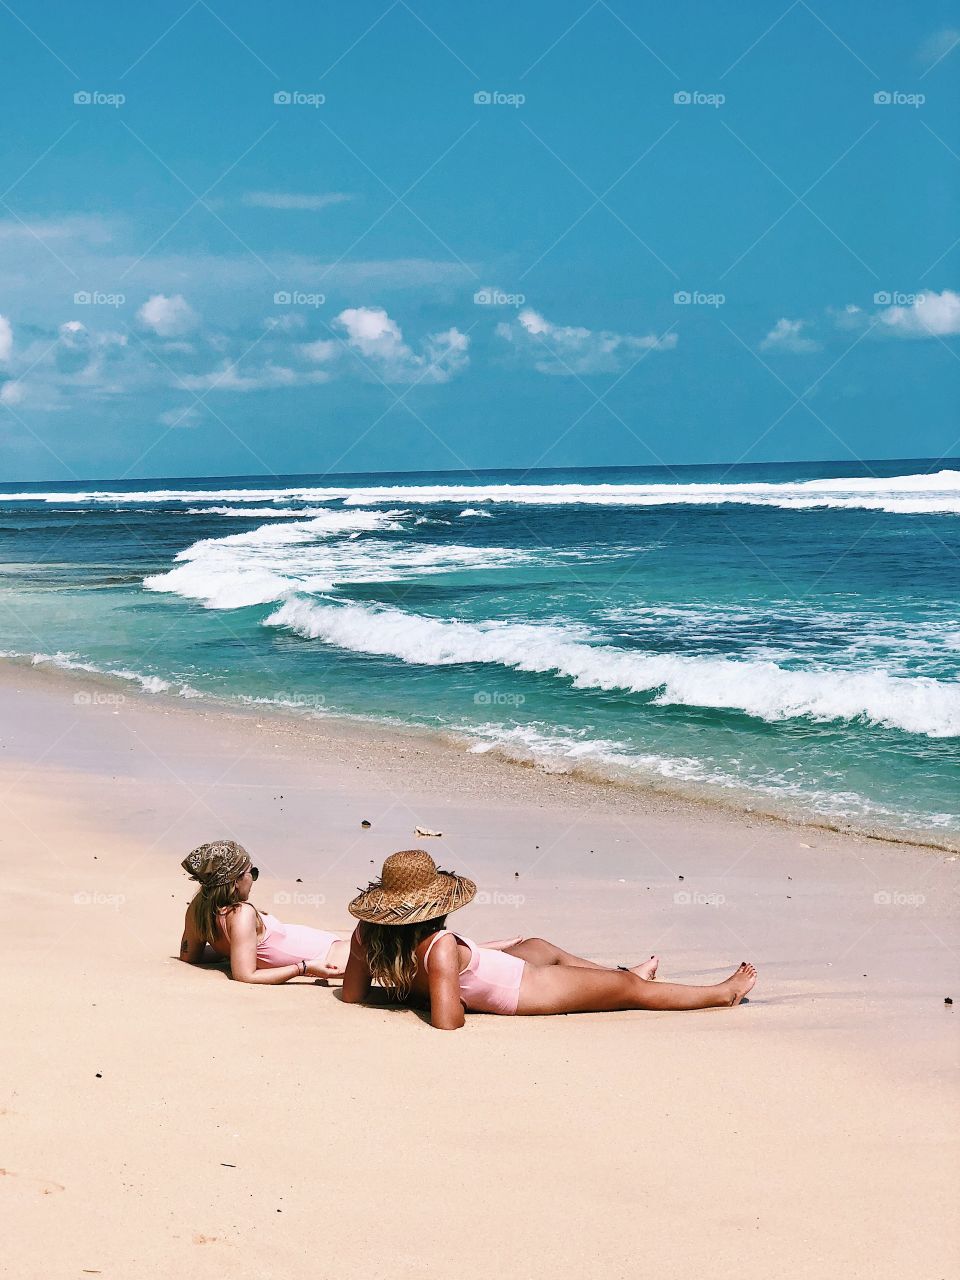 Photo taken at Nyang Nyang Beach, Uluwatu, Bali. These two eye catching girls just chillin by the beach with cute swimsuit and hats